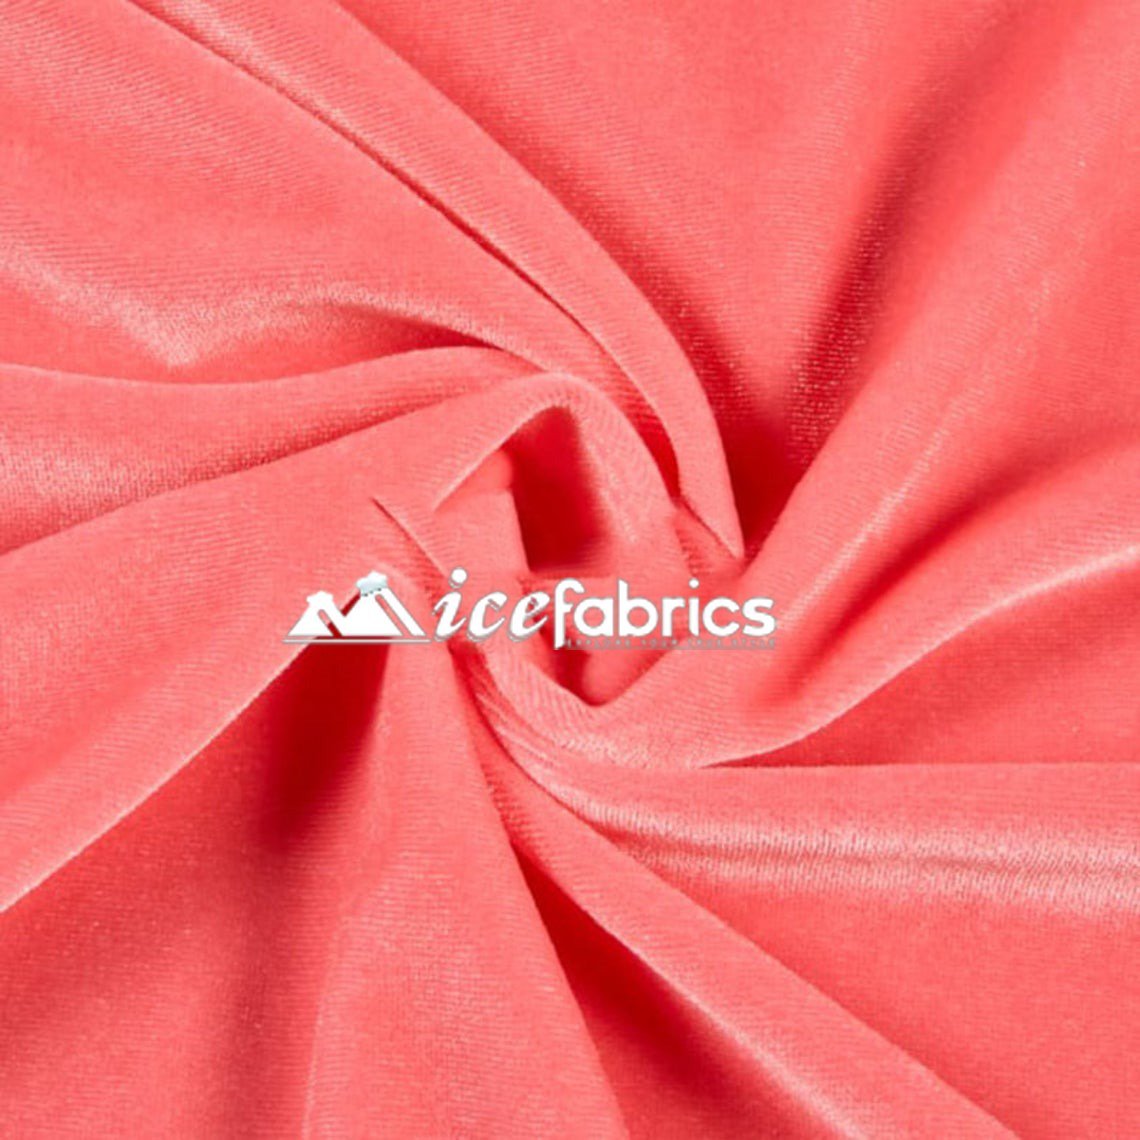 Hight Quality Stretch Velvet Fabric By The Roll (20 yards) Wholesale FabricVelvet FabricICE FABRICSICE FABRICSCoralBy The Roll (60" Wide)Hight Quality Stretch Velvet Fabric By The Roll (20 yards) Wholesale Fabric ICE FABRICS Coral